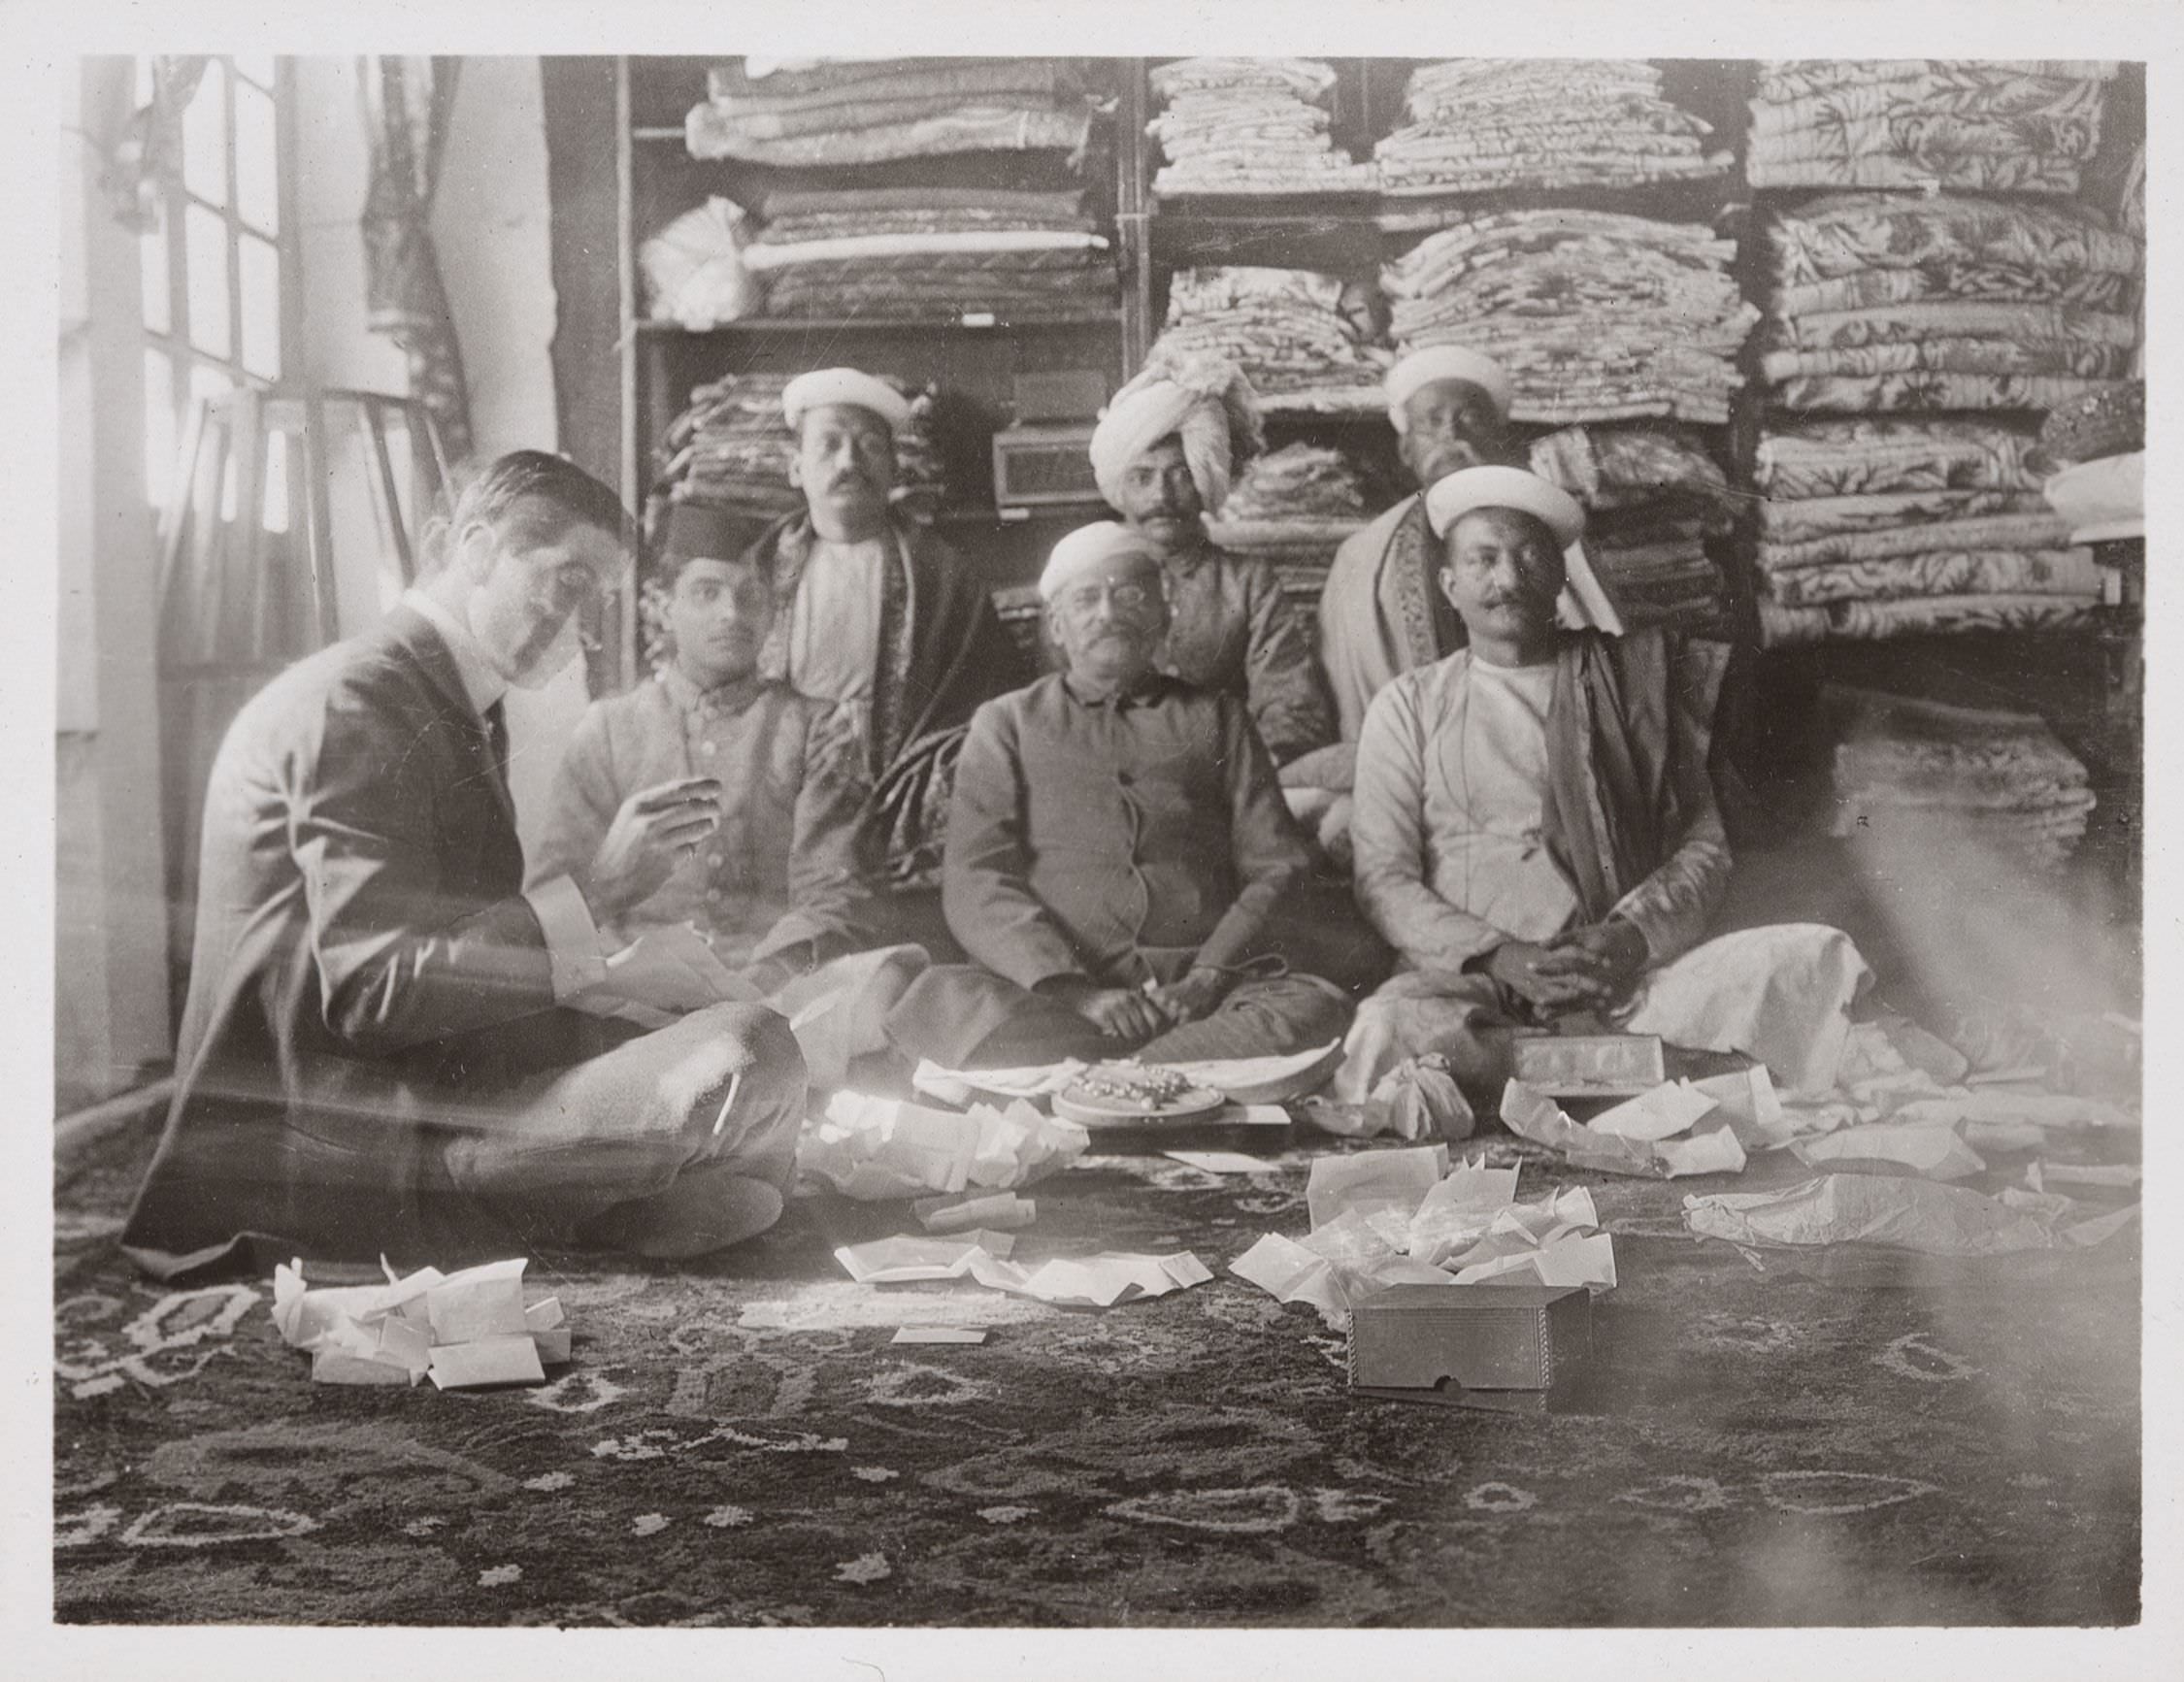 Jacques Cartier with Indian gemstone dealers